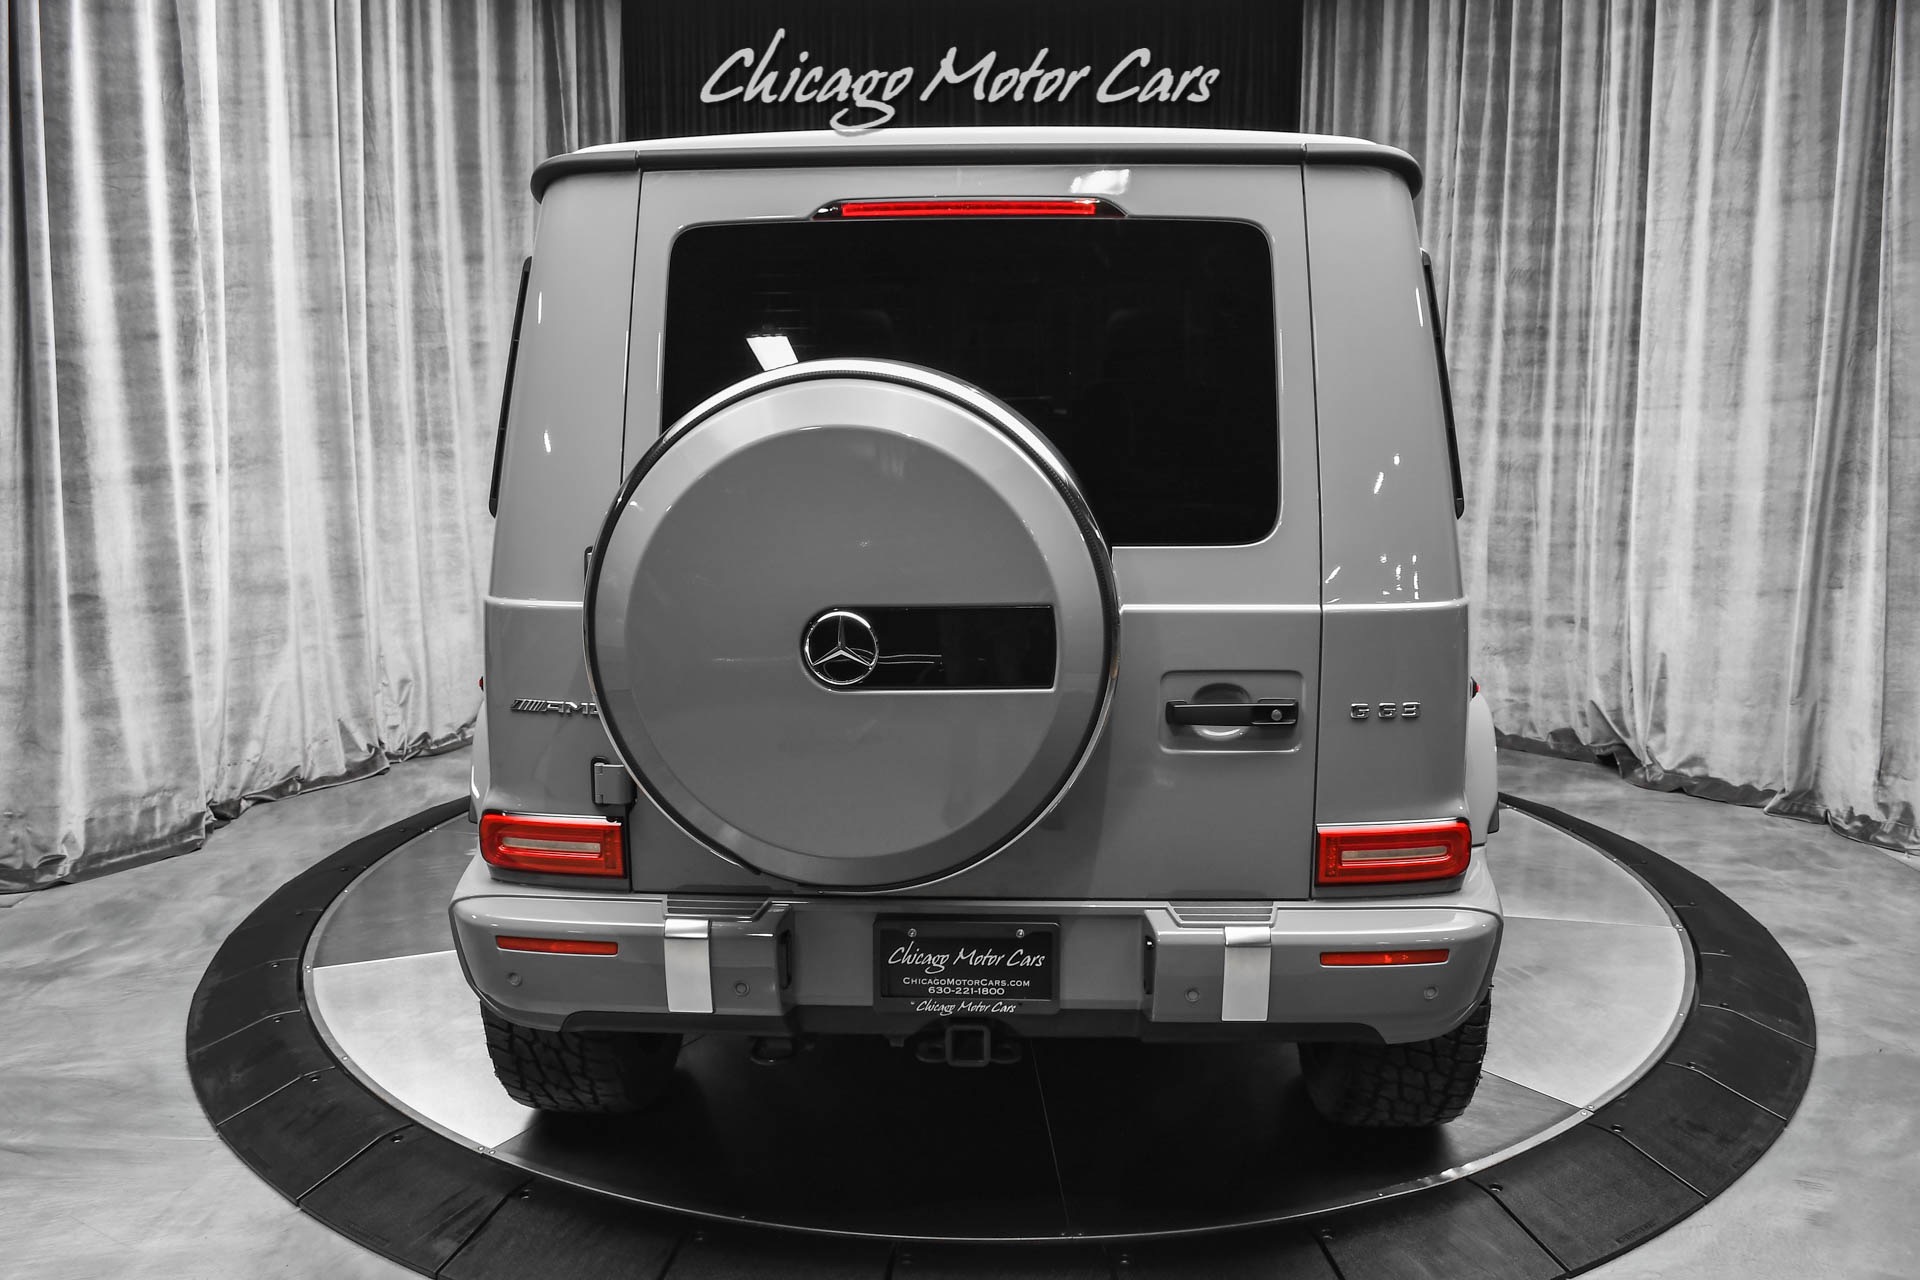 Used 21 Mercedes Benz G63 Amg 4matic Suv Rare G Manufaktur Arabian Grey 8k Miles Front Ppf Loaded For Sale 239 800 Chicago Motor Cars Stock b